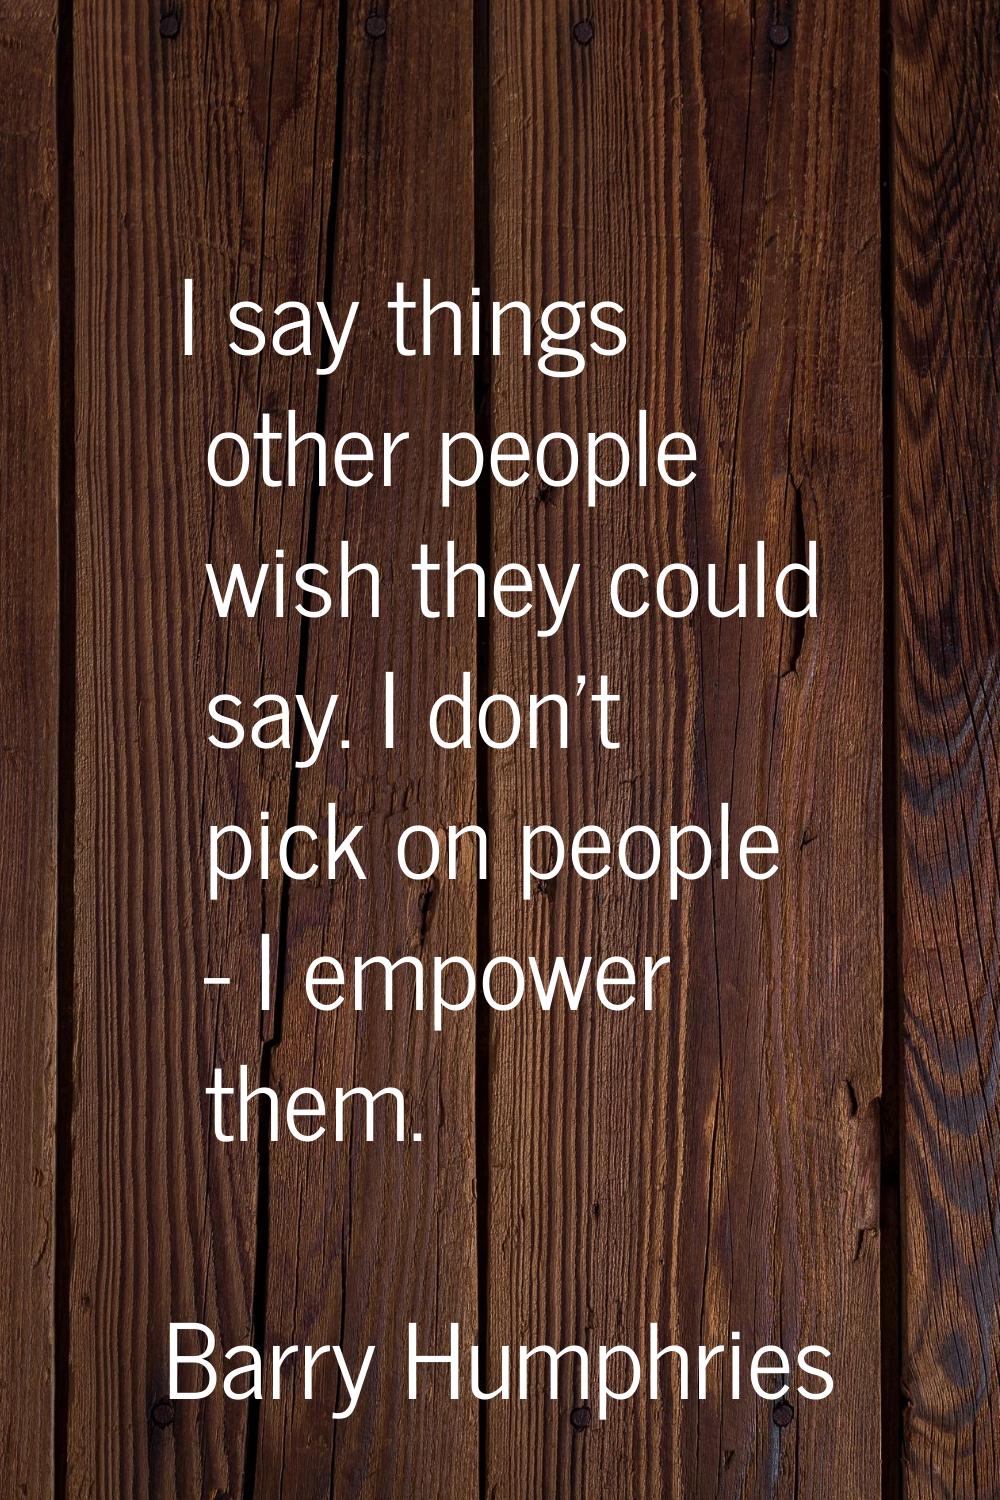 I say things other people wish they could say. I don't pick on people - I empower them.